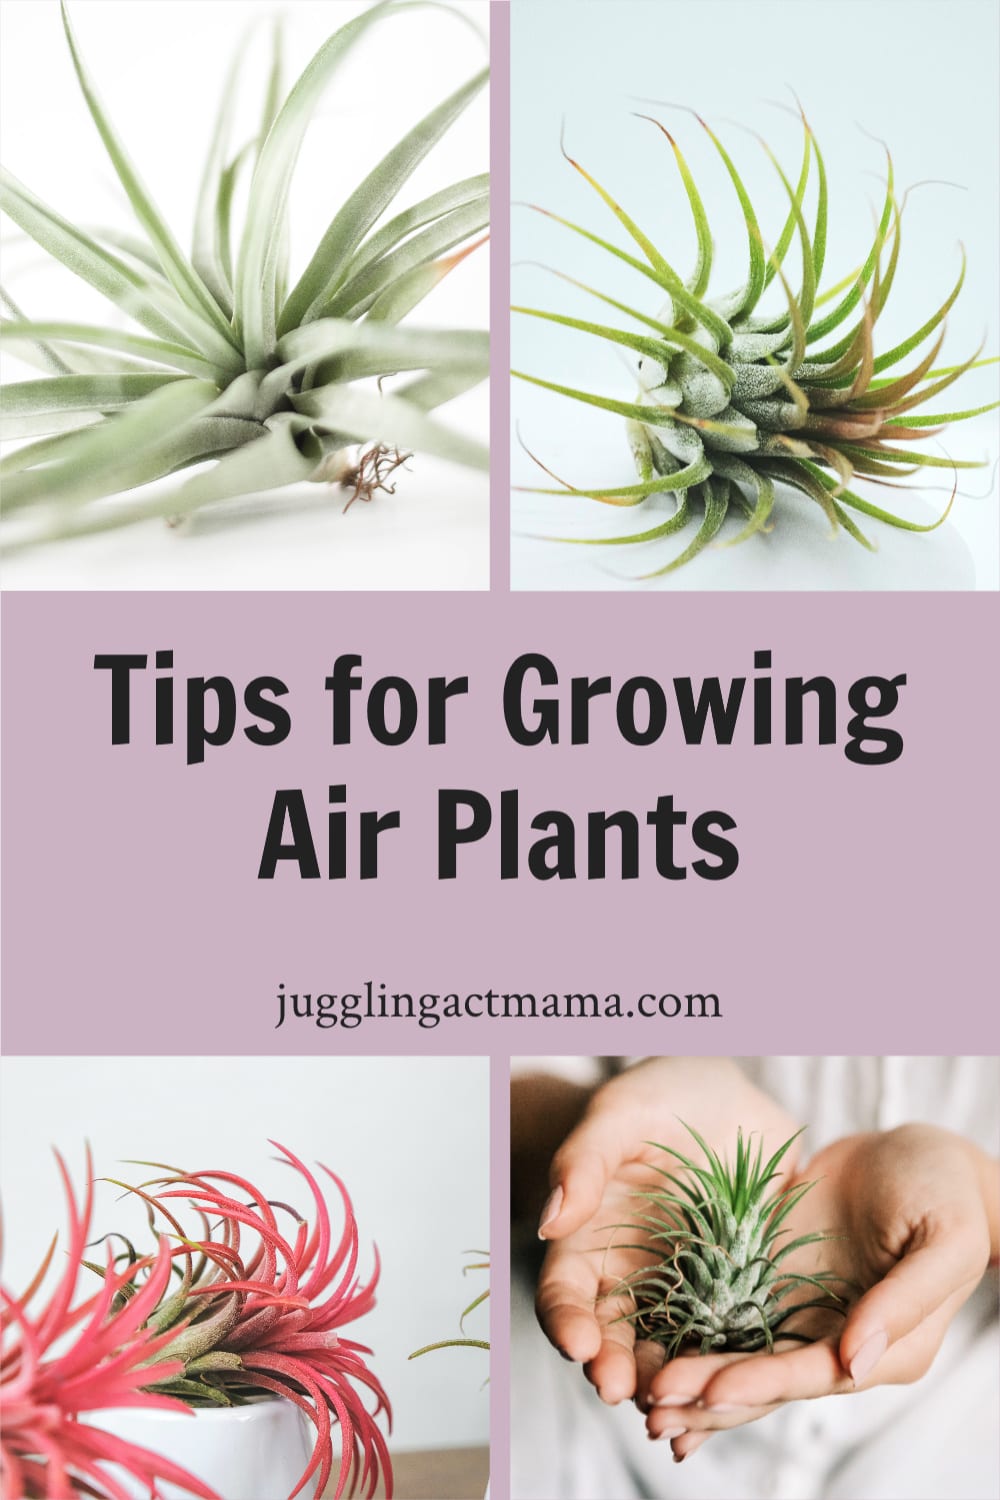 How to Grow Air Plants - These unique little plants are perfect for beginners because they don’t require a lot of maintenance! Since they thrive with indirect sunlight, you can use them as part of your decor in many different areas. via @jugglingactmama